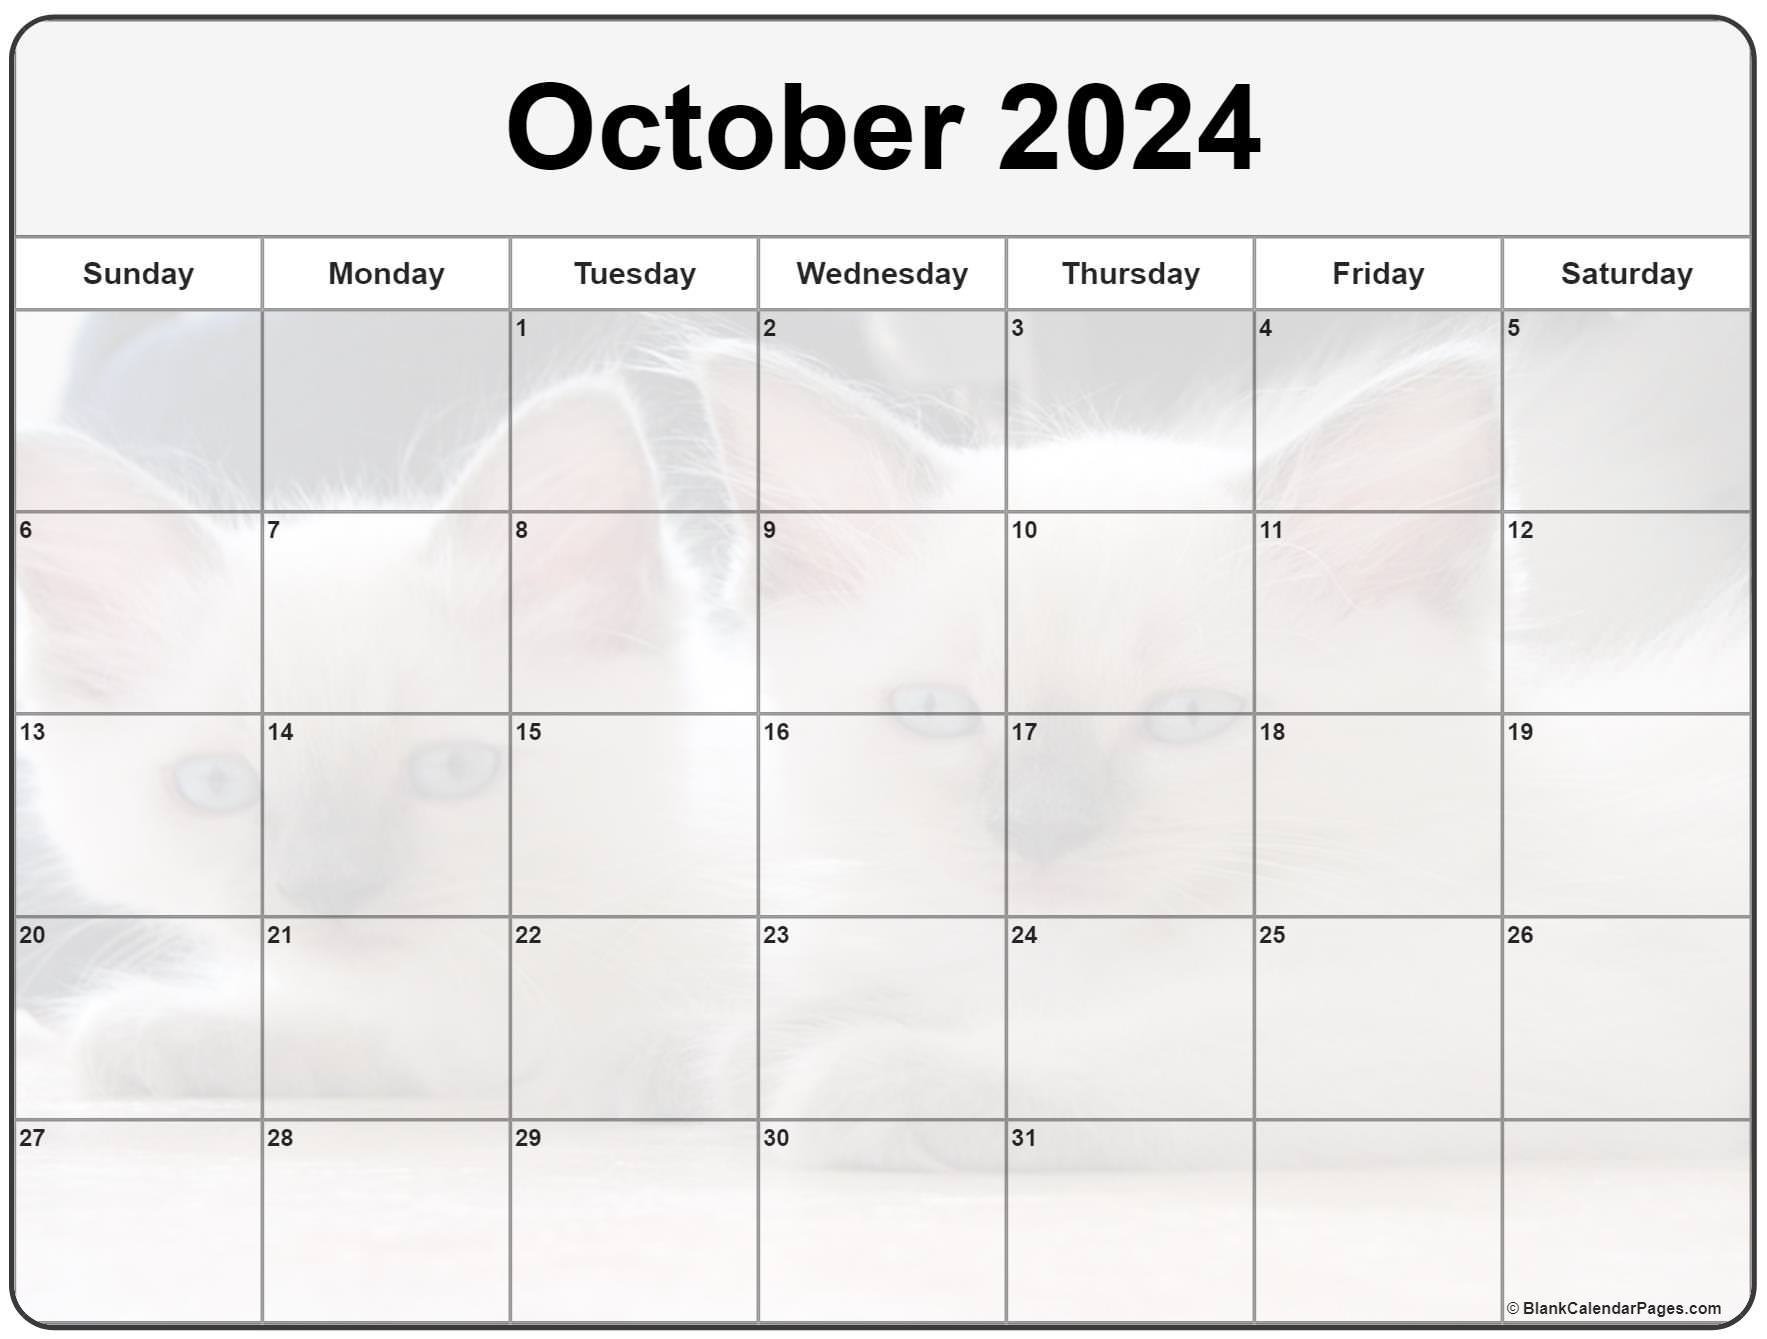 Collection of October 2024 photo calendars with image filters.